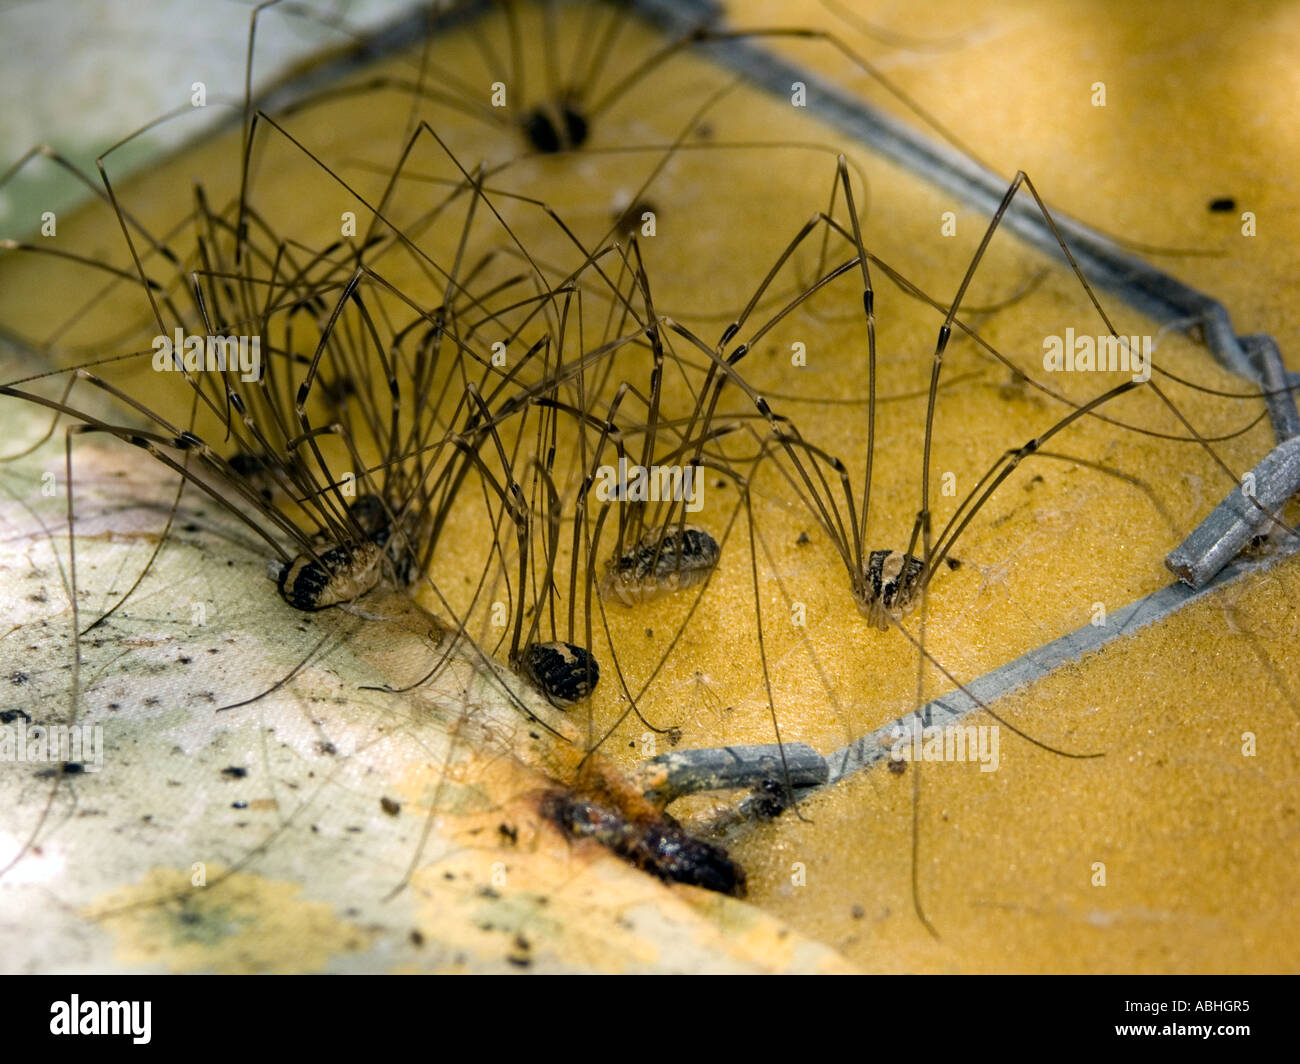 Group of Daddy Longlegs under a discarded sofa Stock Photo